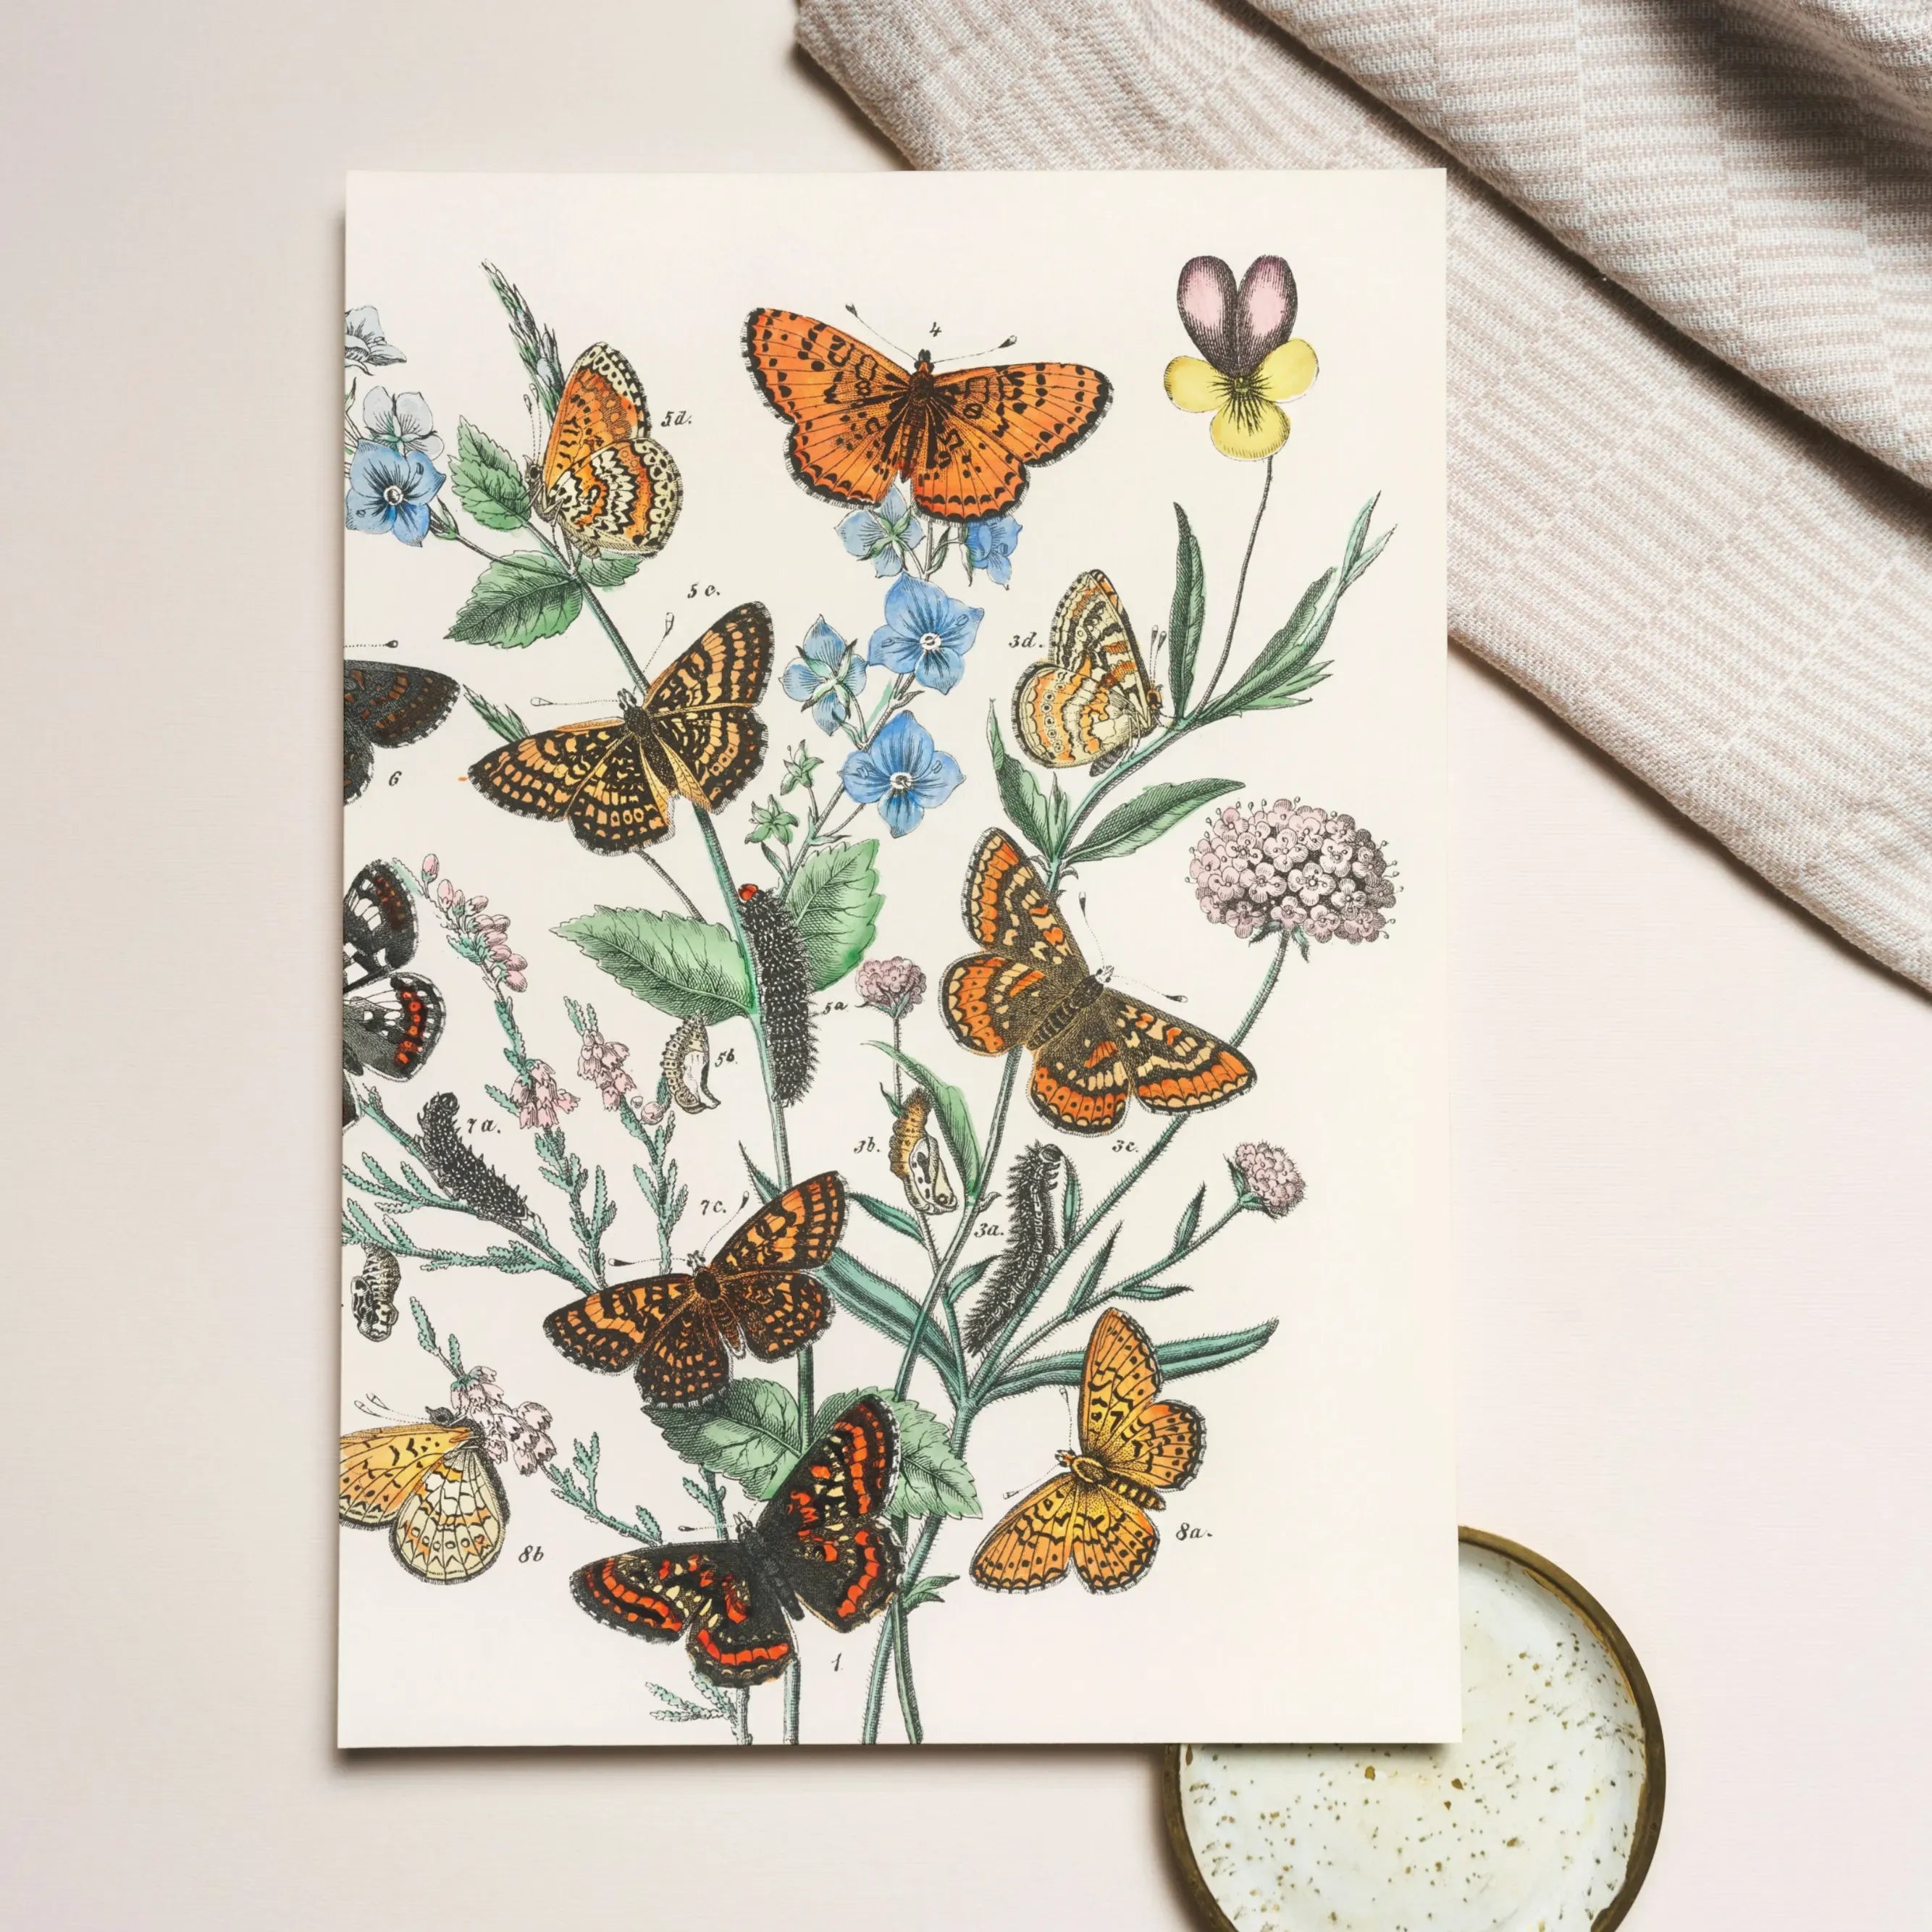 European Butterflies And Moths 2 - William Forsell Kirby Greeting Card - Greeting & Note Cards - Aesthetic Art